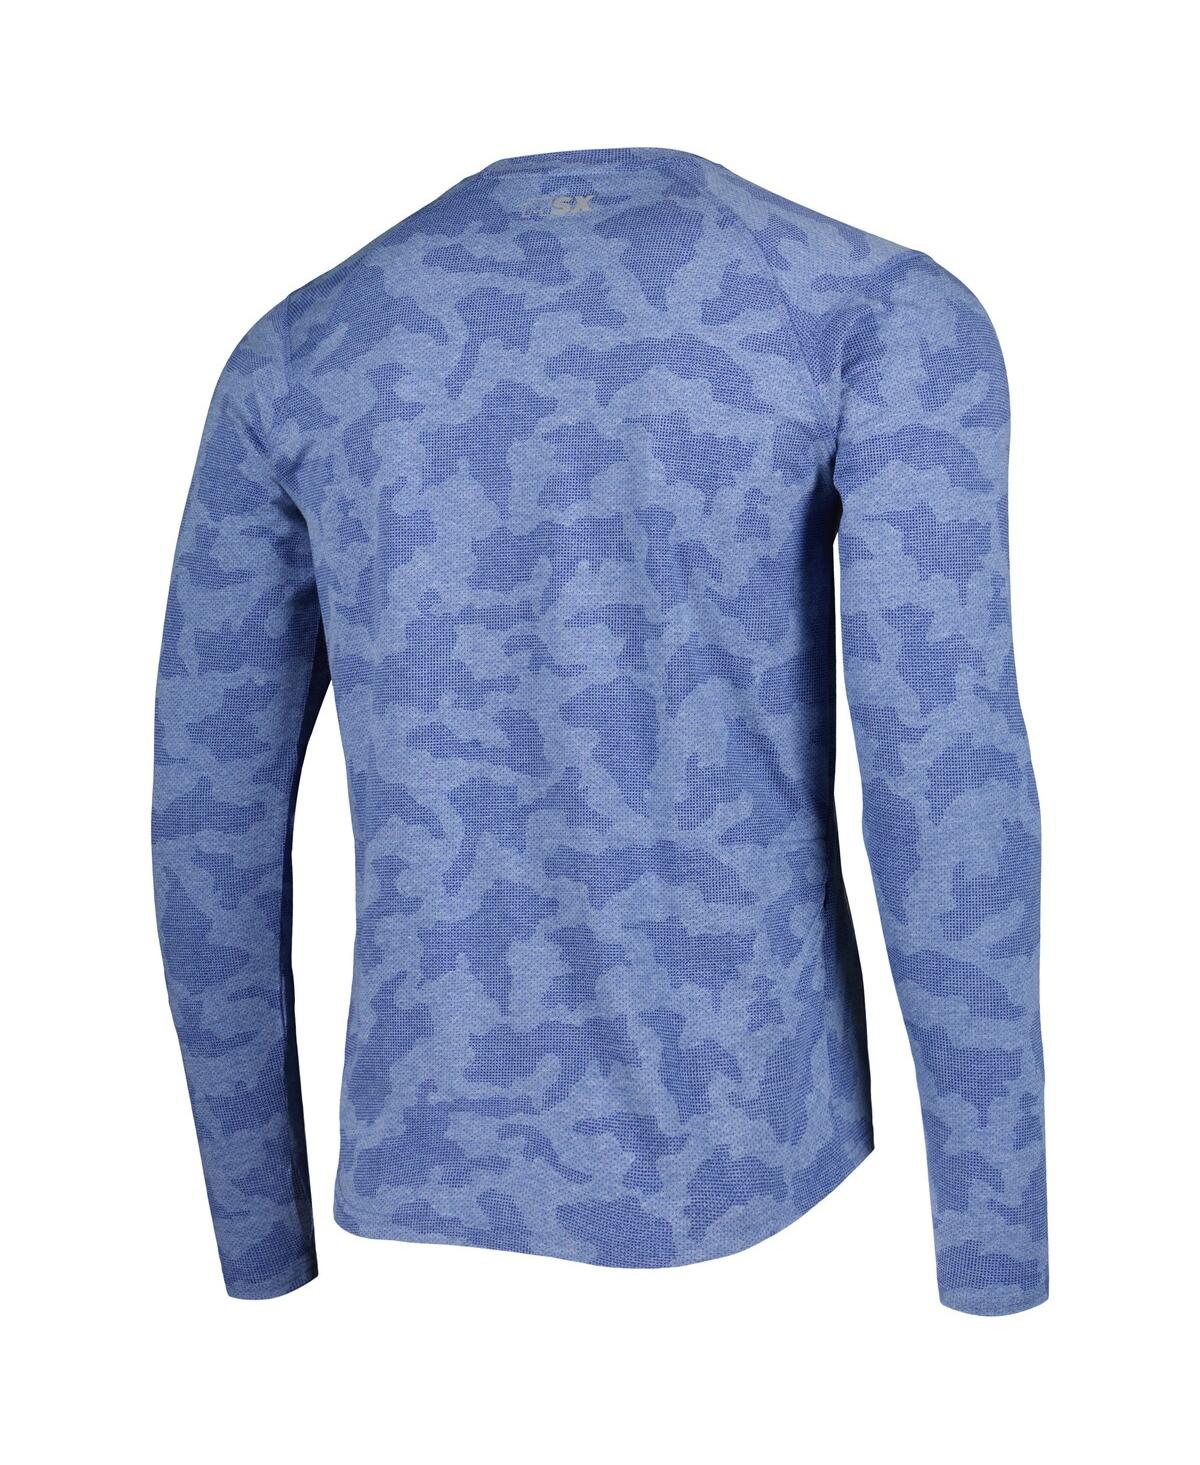 Shop Msx By Michael Strahan Men's  Royal Indianapolis Colts Performance Camo Long Sleeve T-shirt